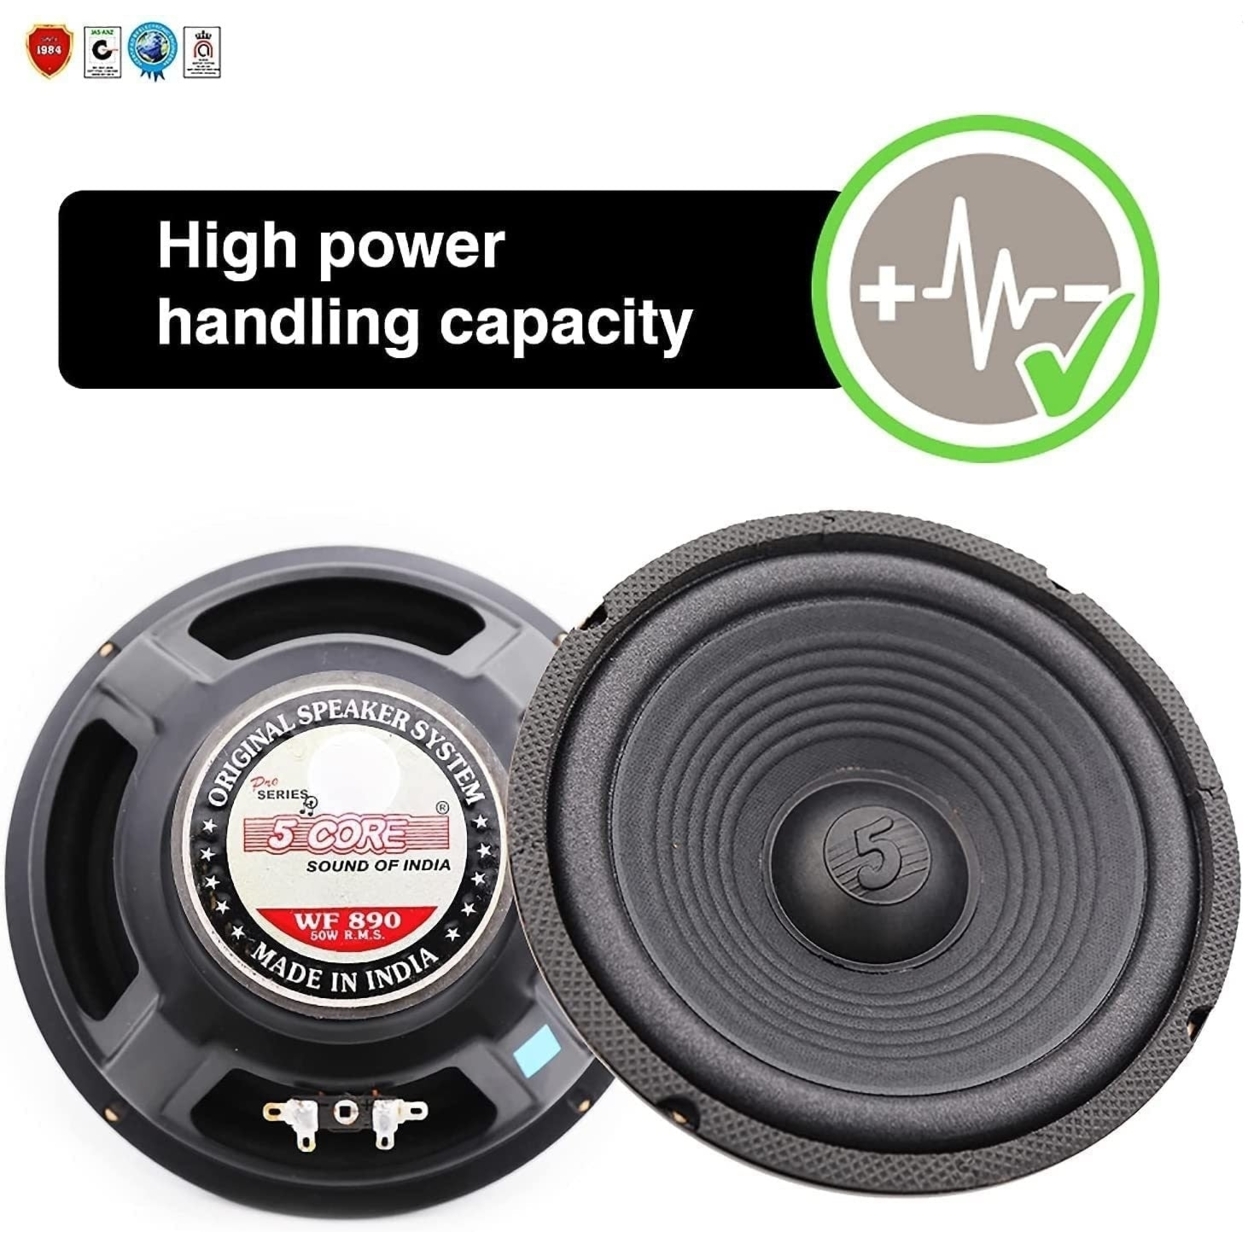 Replacement 8" Woofer Speaker 13 Oz Magnet 500W PMPO Car Home Audio STEREO 4 Ohm - image 3 of 7